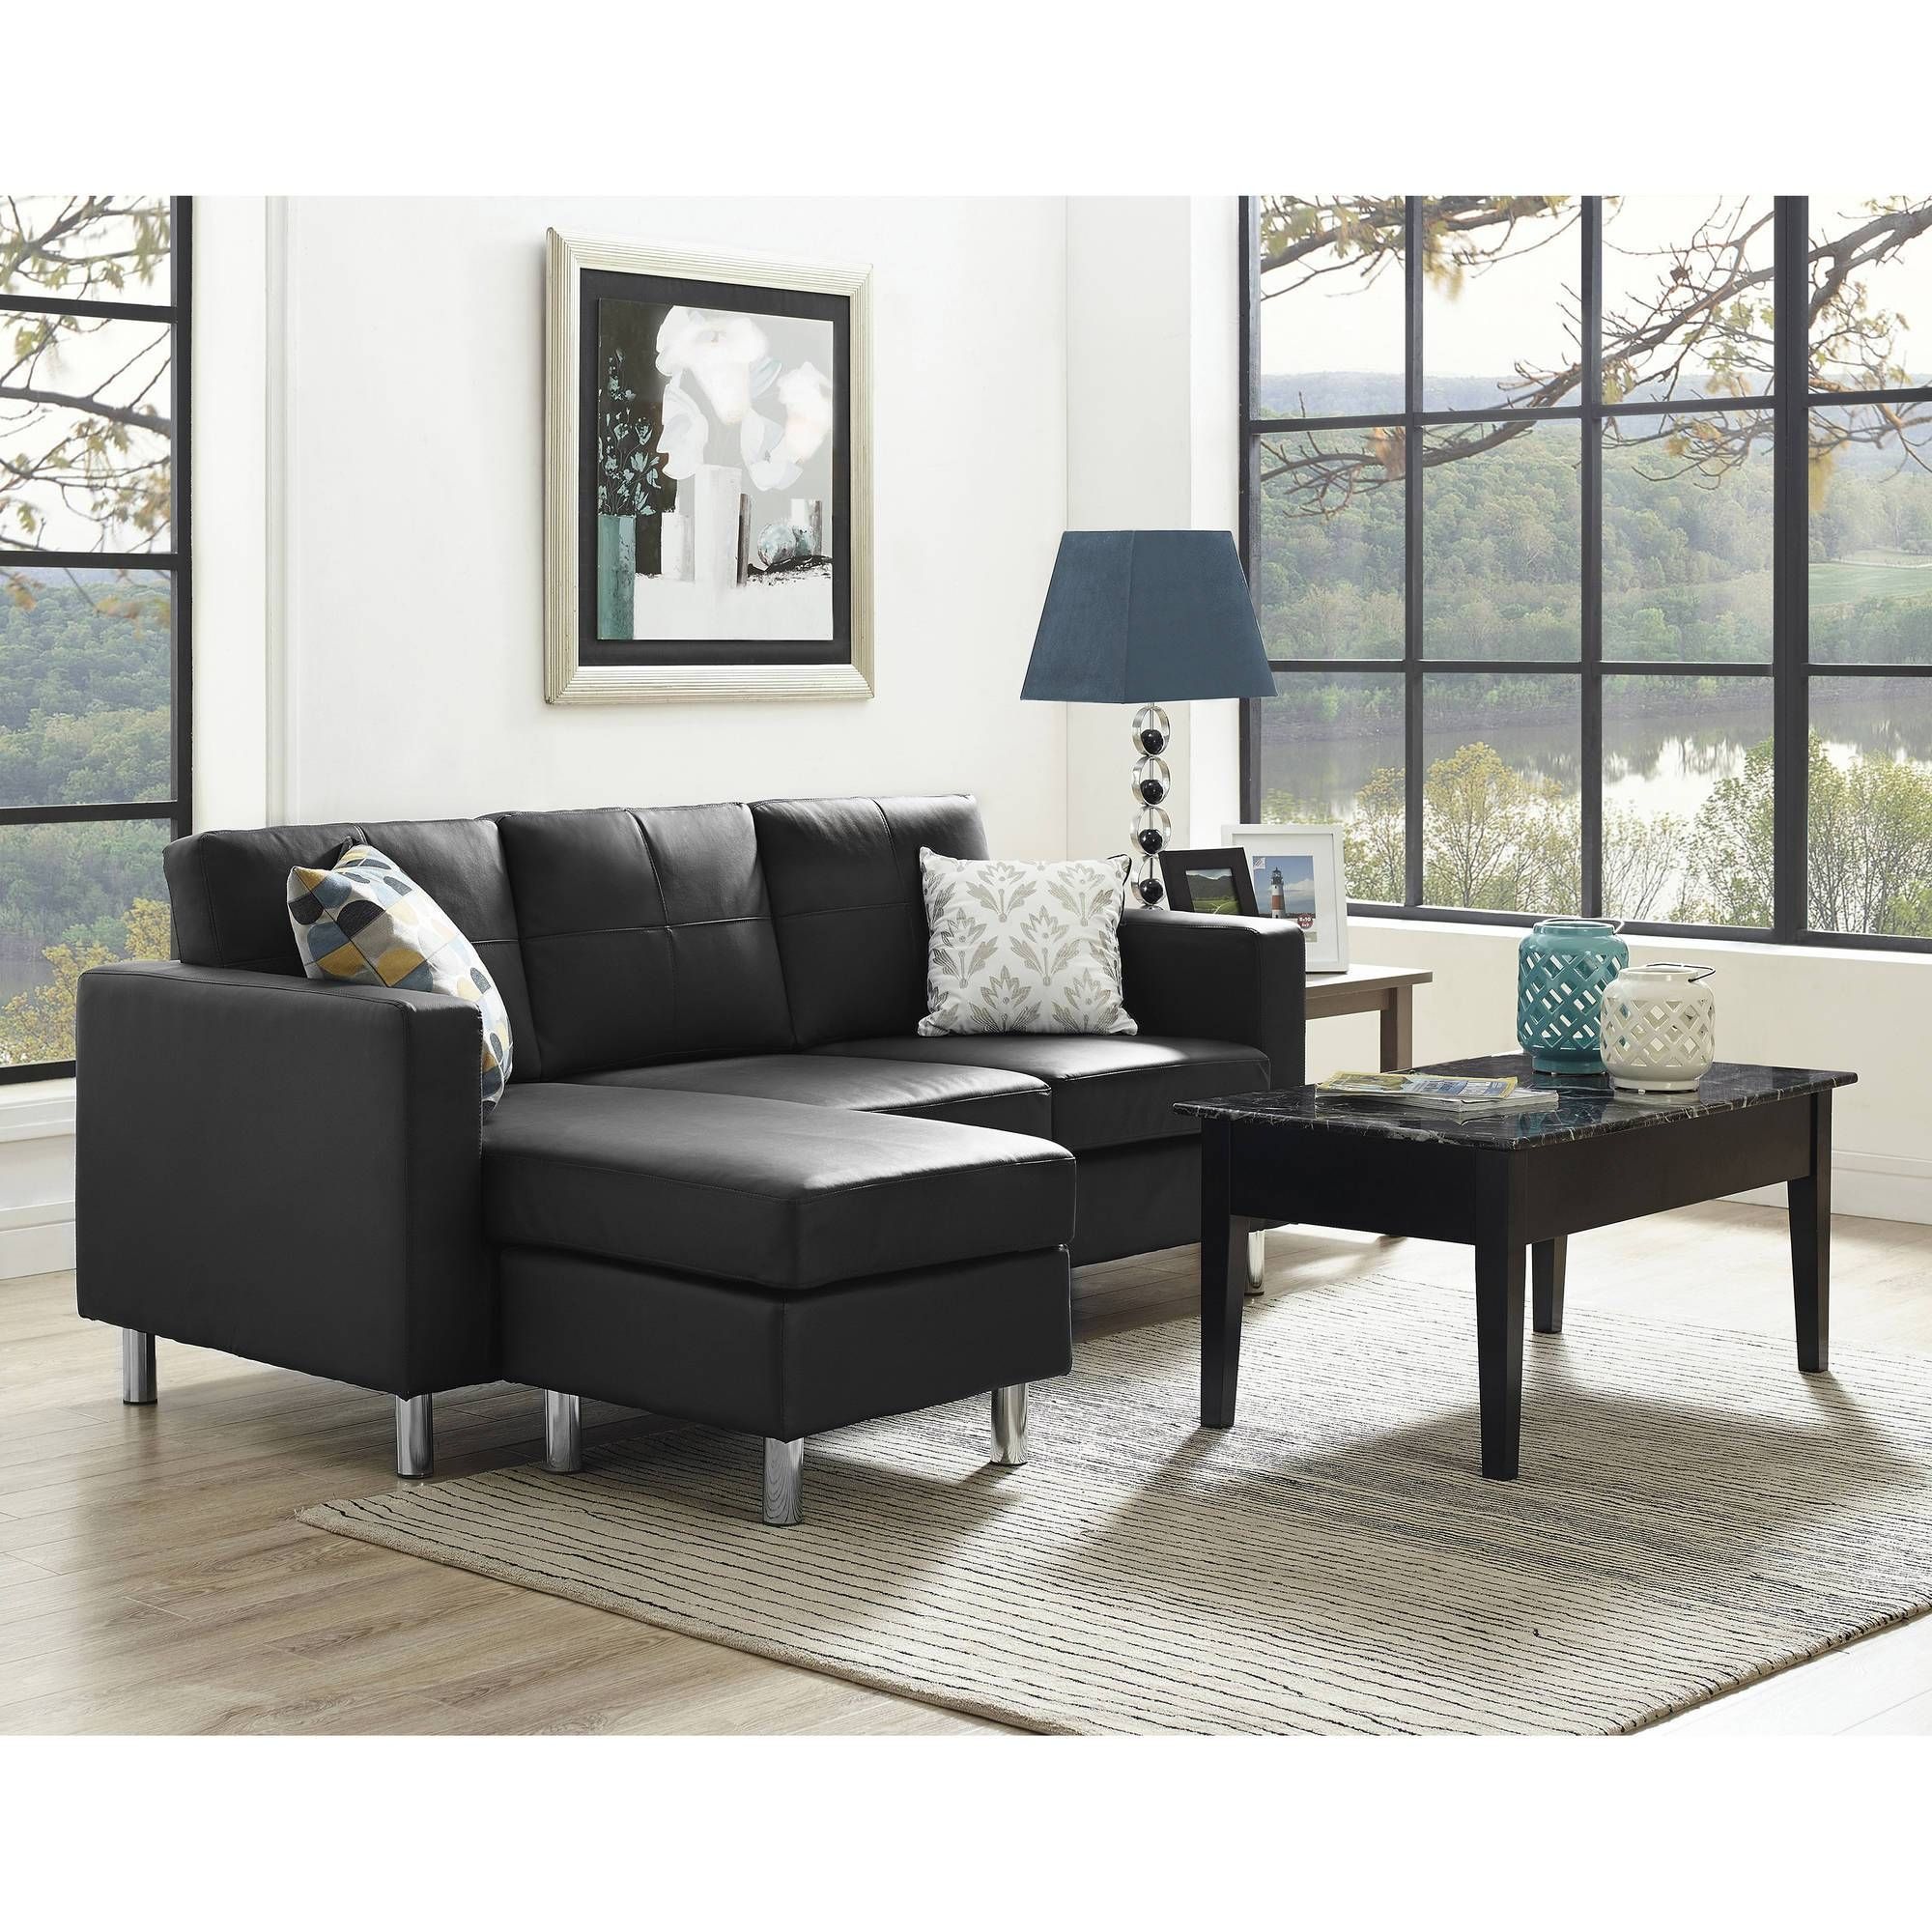 Amusing Sofa Sectionals For Small Spaces 41 With Additional Regarding Contemporary Black Leather Sectional Sofa Left Side Chaise (View 12 of 30)